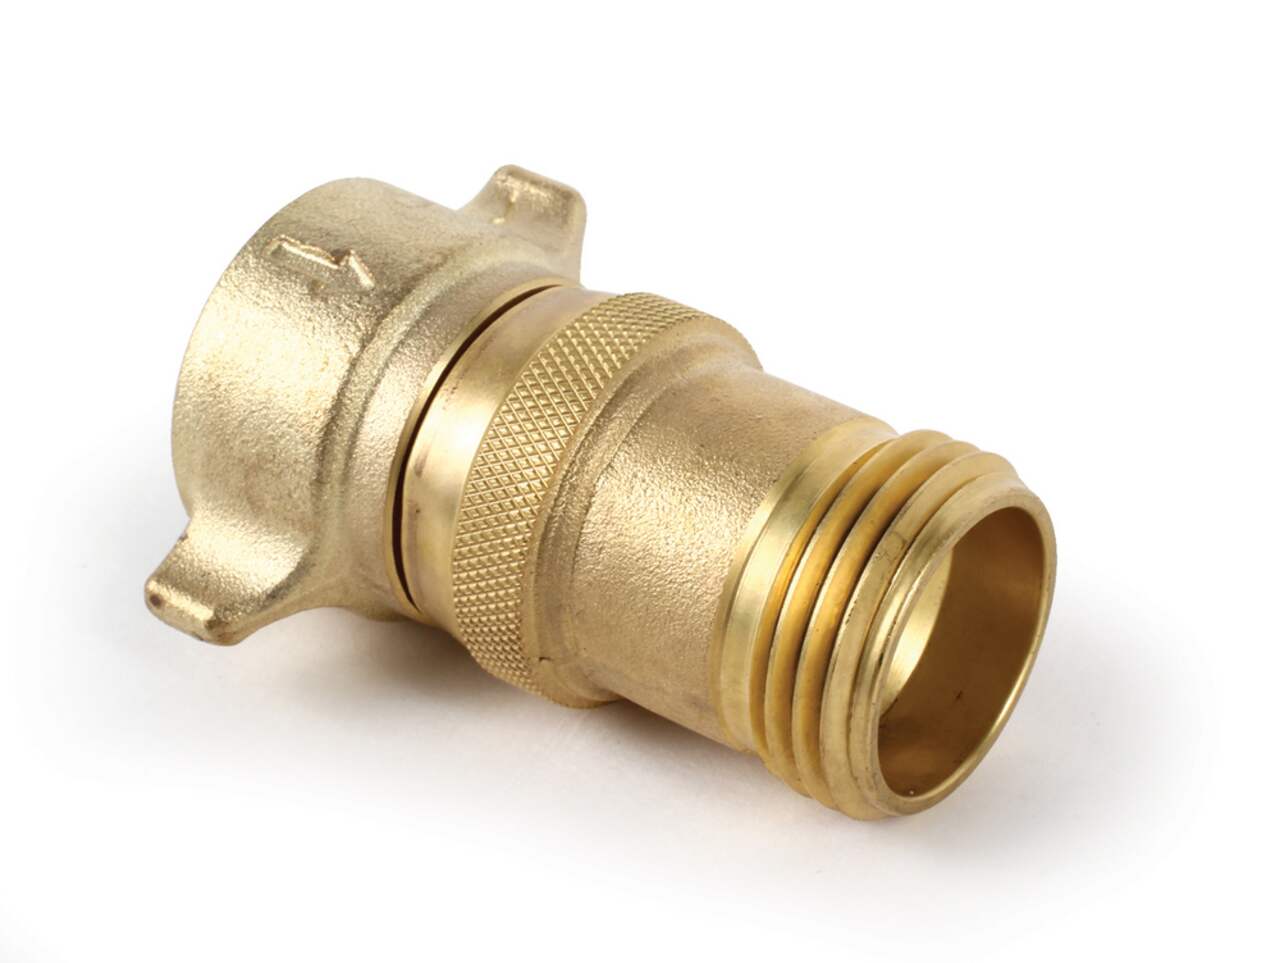 Adjustable Water Pressure Regulator with Gauge and Filter, Brass Lead-Free  3/4 NH Thread for Camper, RV Trailer